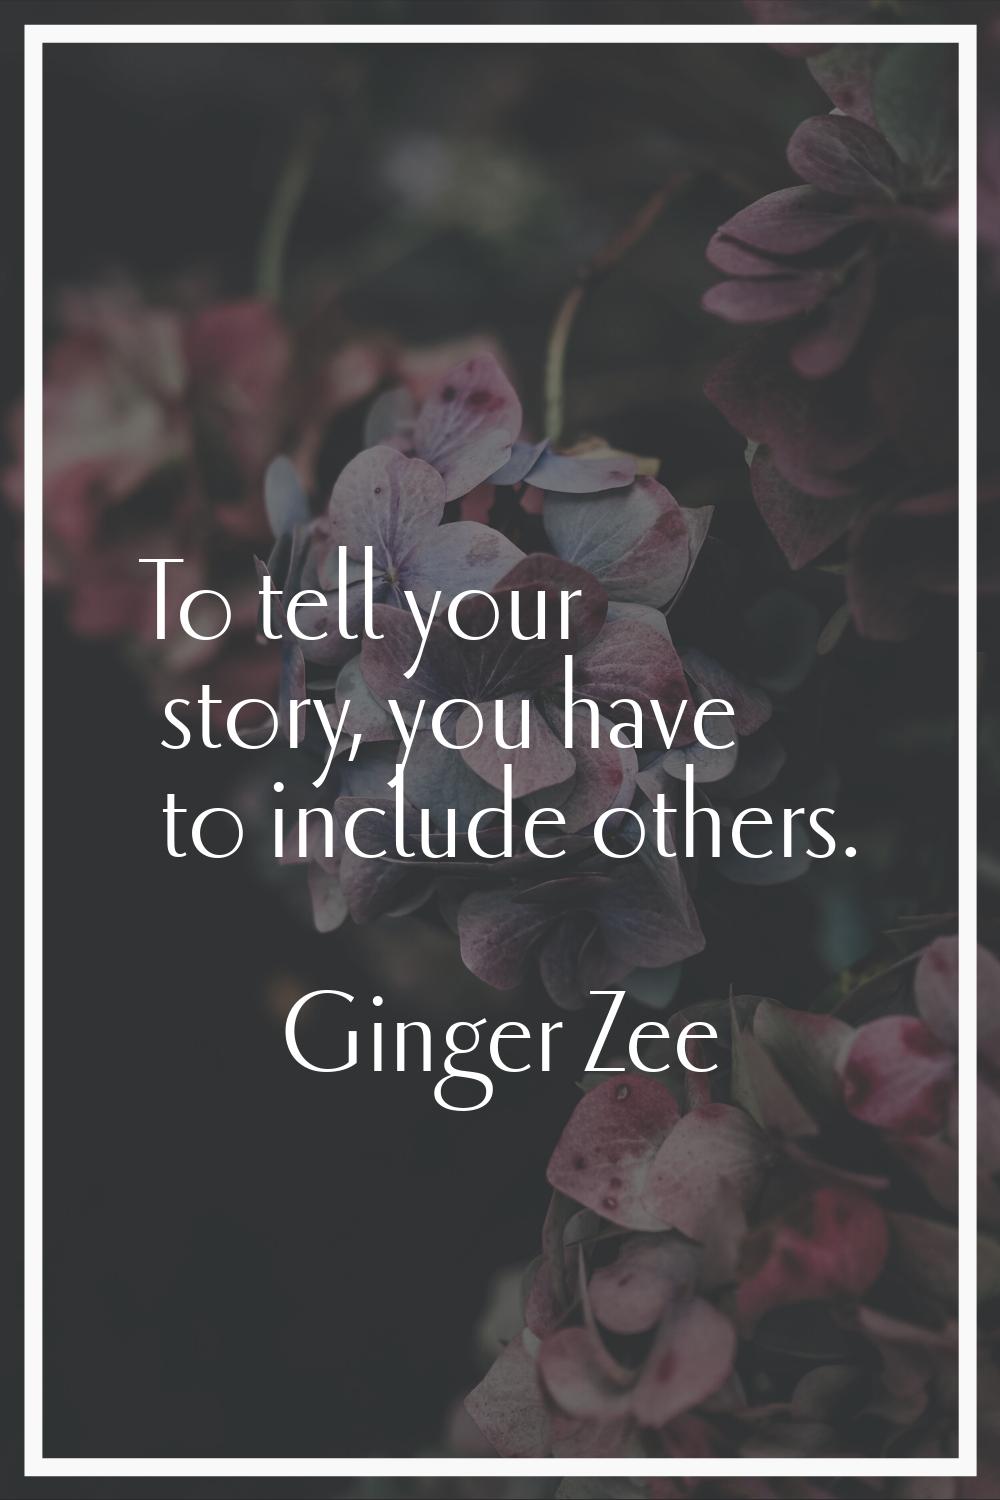 To tell your story, you have to include others.